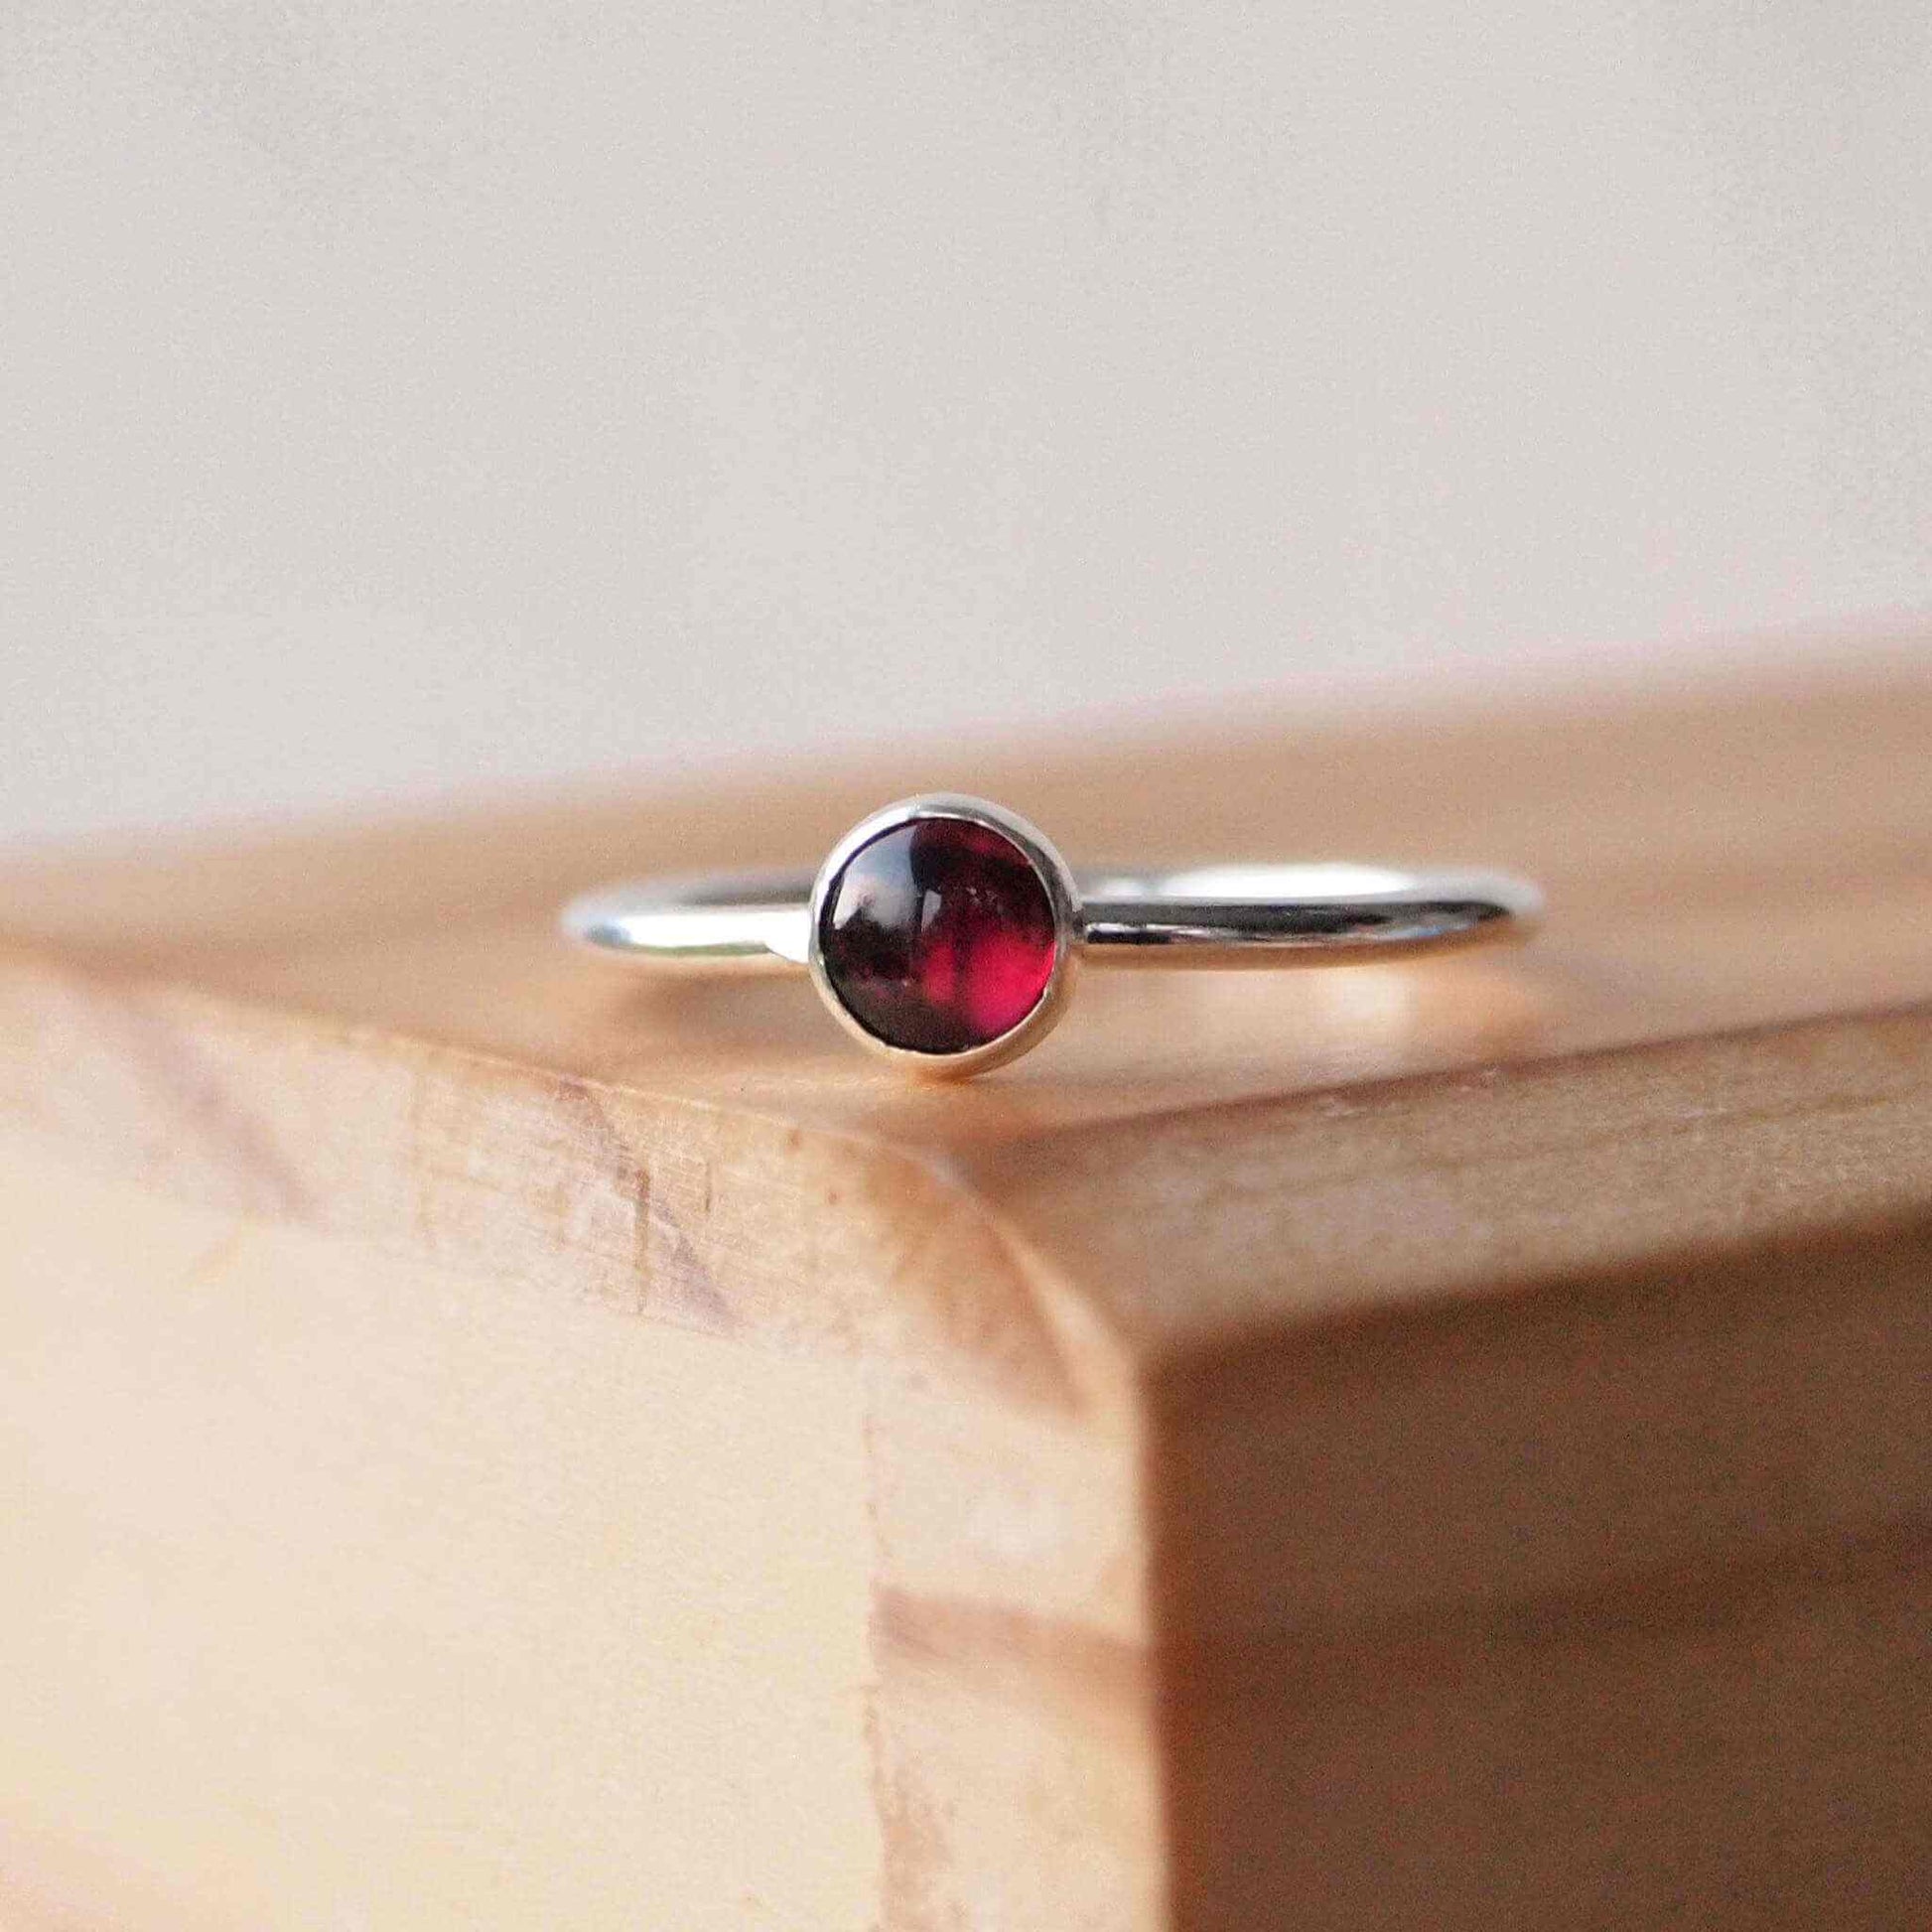 Garnet and Sterling Silver January Birthstone Ring. A 5mm round deep red garnet cabochon set very simply onto a round band of sterling silver in a minimalist style with no decoration. Handmade by maram jewellery in Scotland